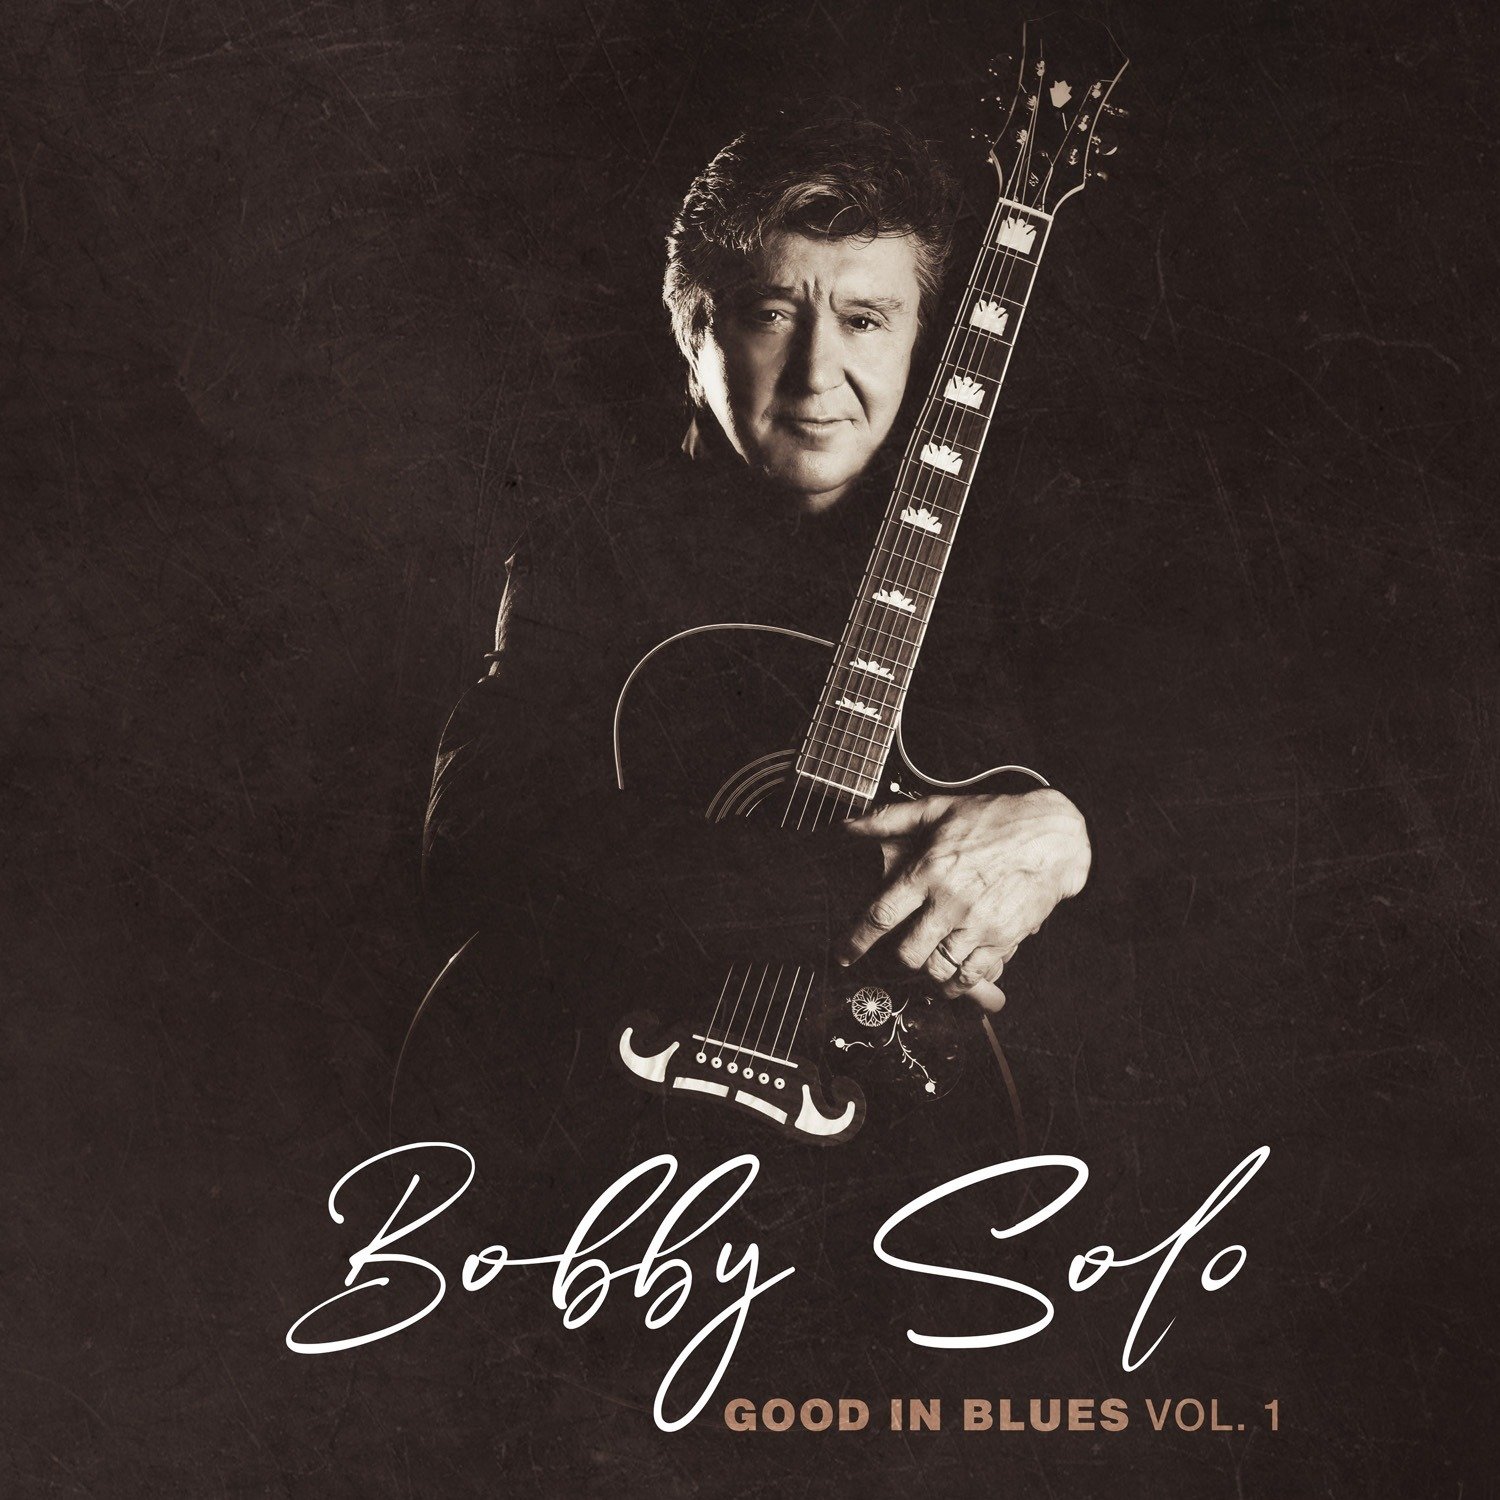 CD Shop - SOLO, BOBBY GOOD IN BLUES VOL. 1